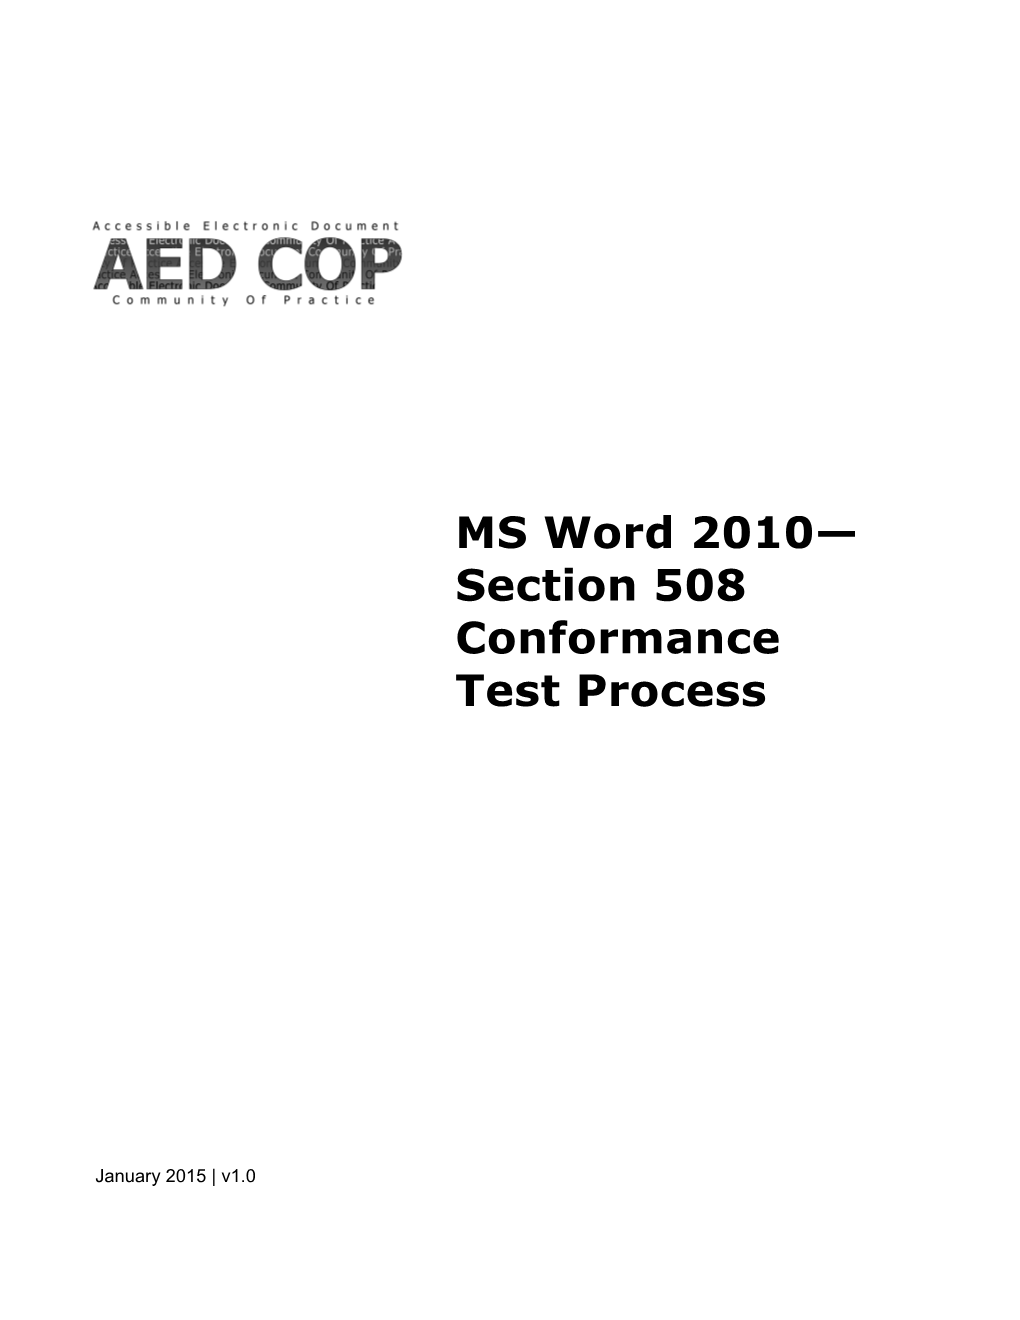 MS Word 2010 Section 508 Conformance Test Process